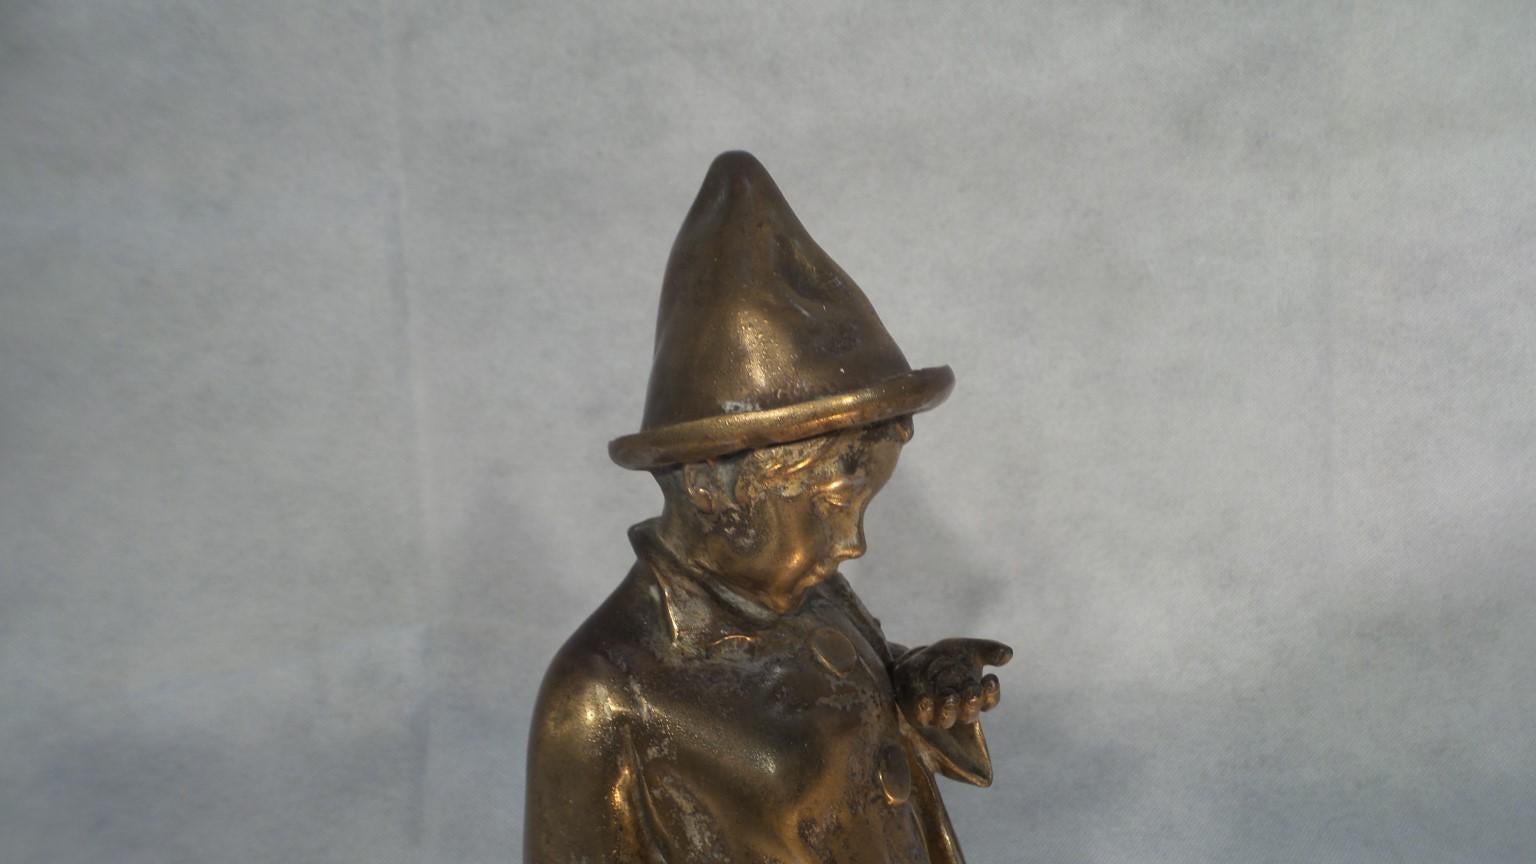 A wonderful and charming Art Deco lamp on marble. The sculpture is spelter lined with a fine layer of bronze . It features a small boy dressed as a clown. In one hand he has a violin and in the other he clutches a handful of coins. Presumably his